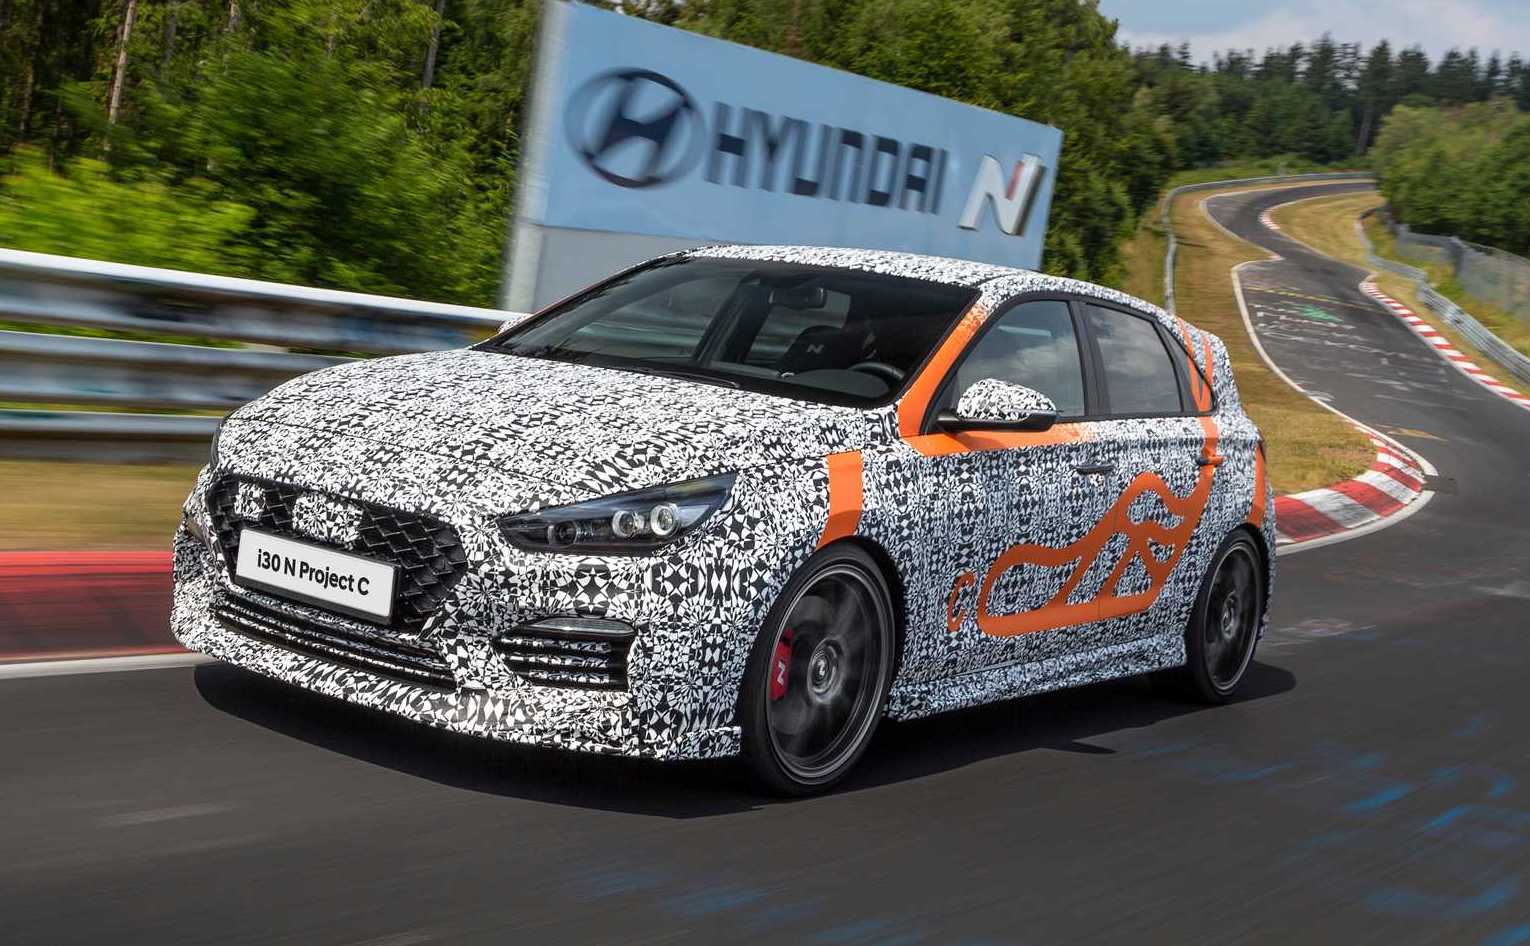 Hyundai i30 N Project C; lighter, more hardcore variant coming